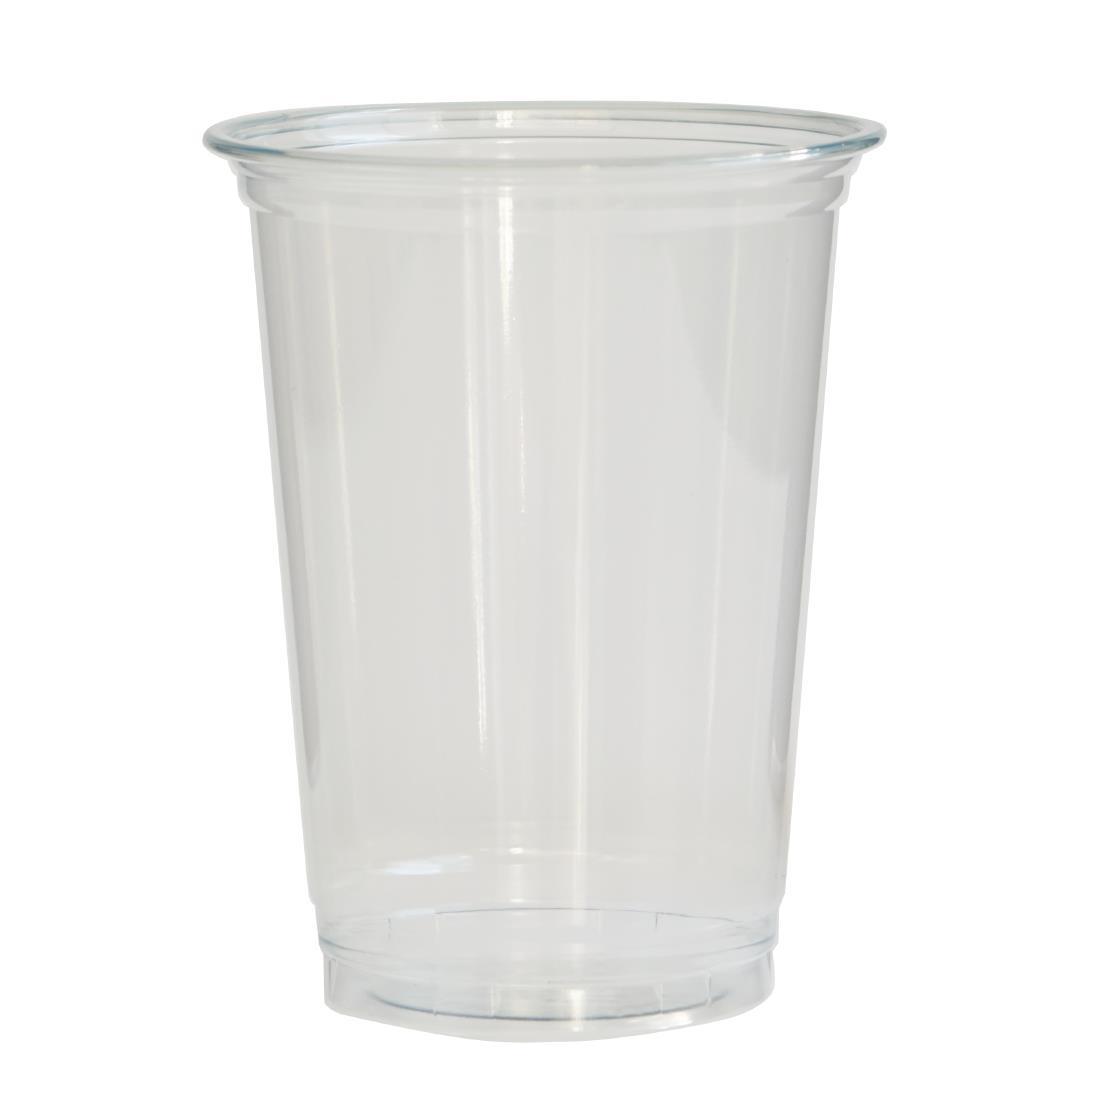 eGreen Disposable Half Pint Glasses to Brim (Pack of 1250) - FN220  - 1